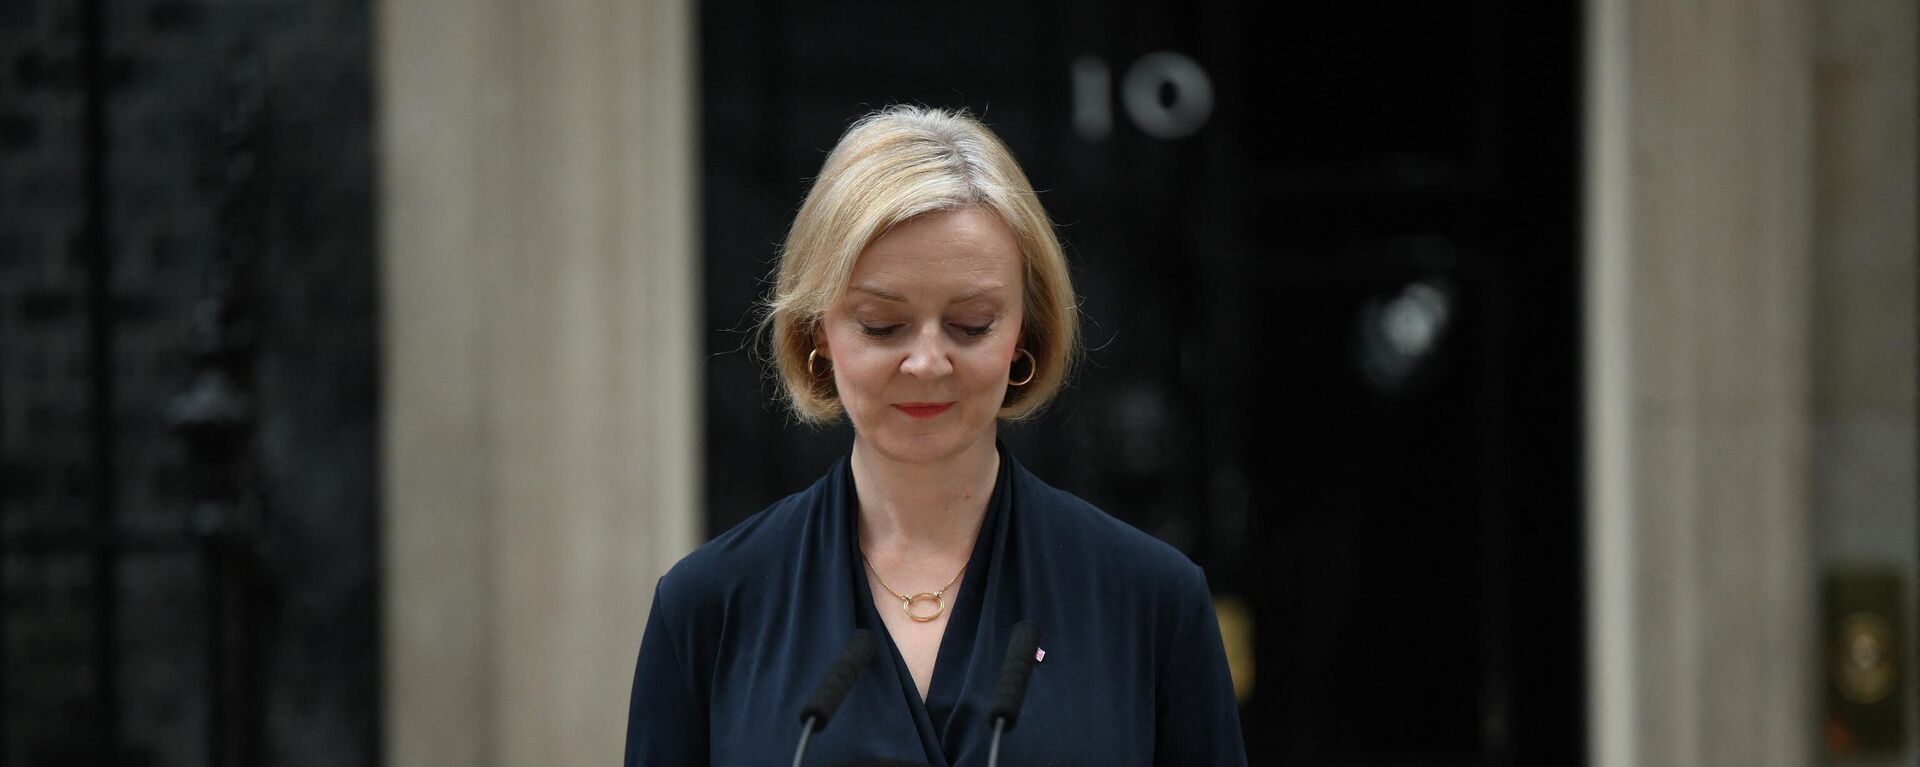 Britain's Prime Minister Liz Truss reacts as she delivers a speech outside of 10 Downing Street in central London on October 20, 2022 to announce her resignation - Sputnik International, 1920, 30.10.2022